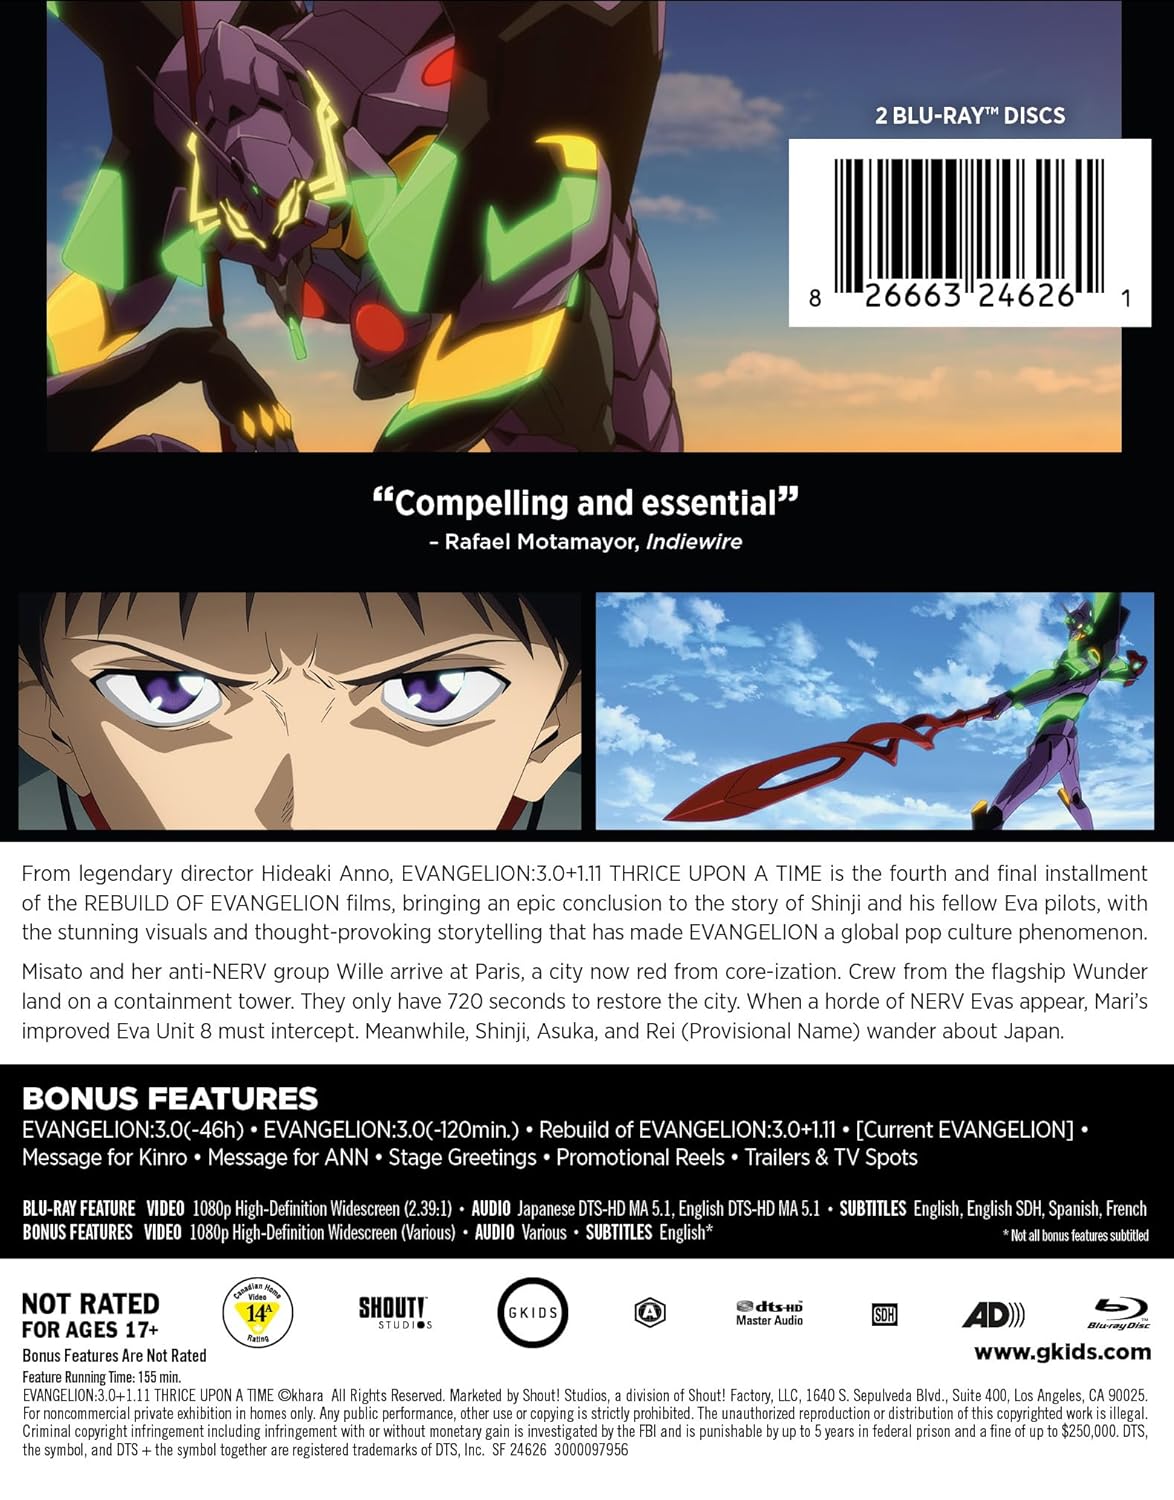 Evangelion: 3.0+1.11 Thrice Upon a Time - Steelbook Blu-Ray (US Import)